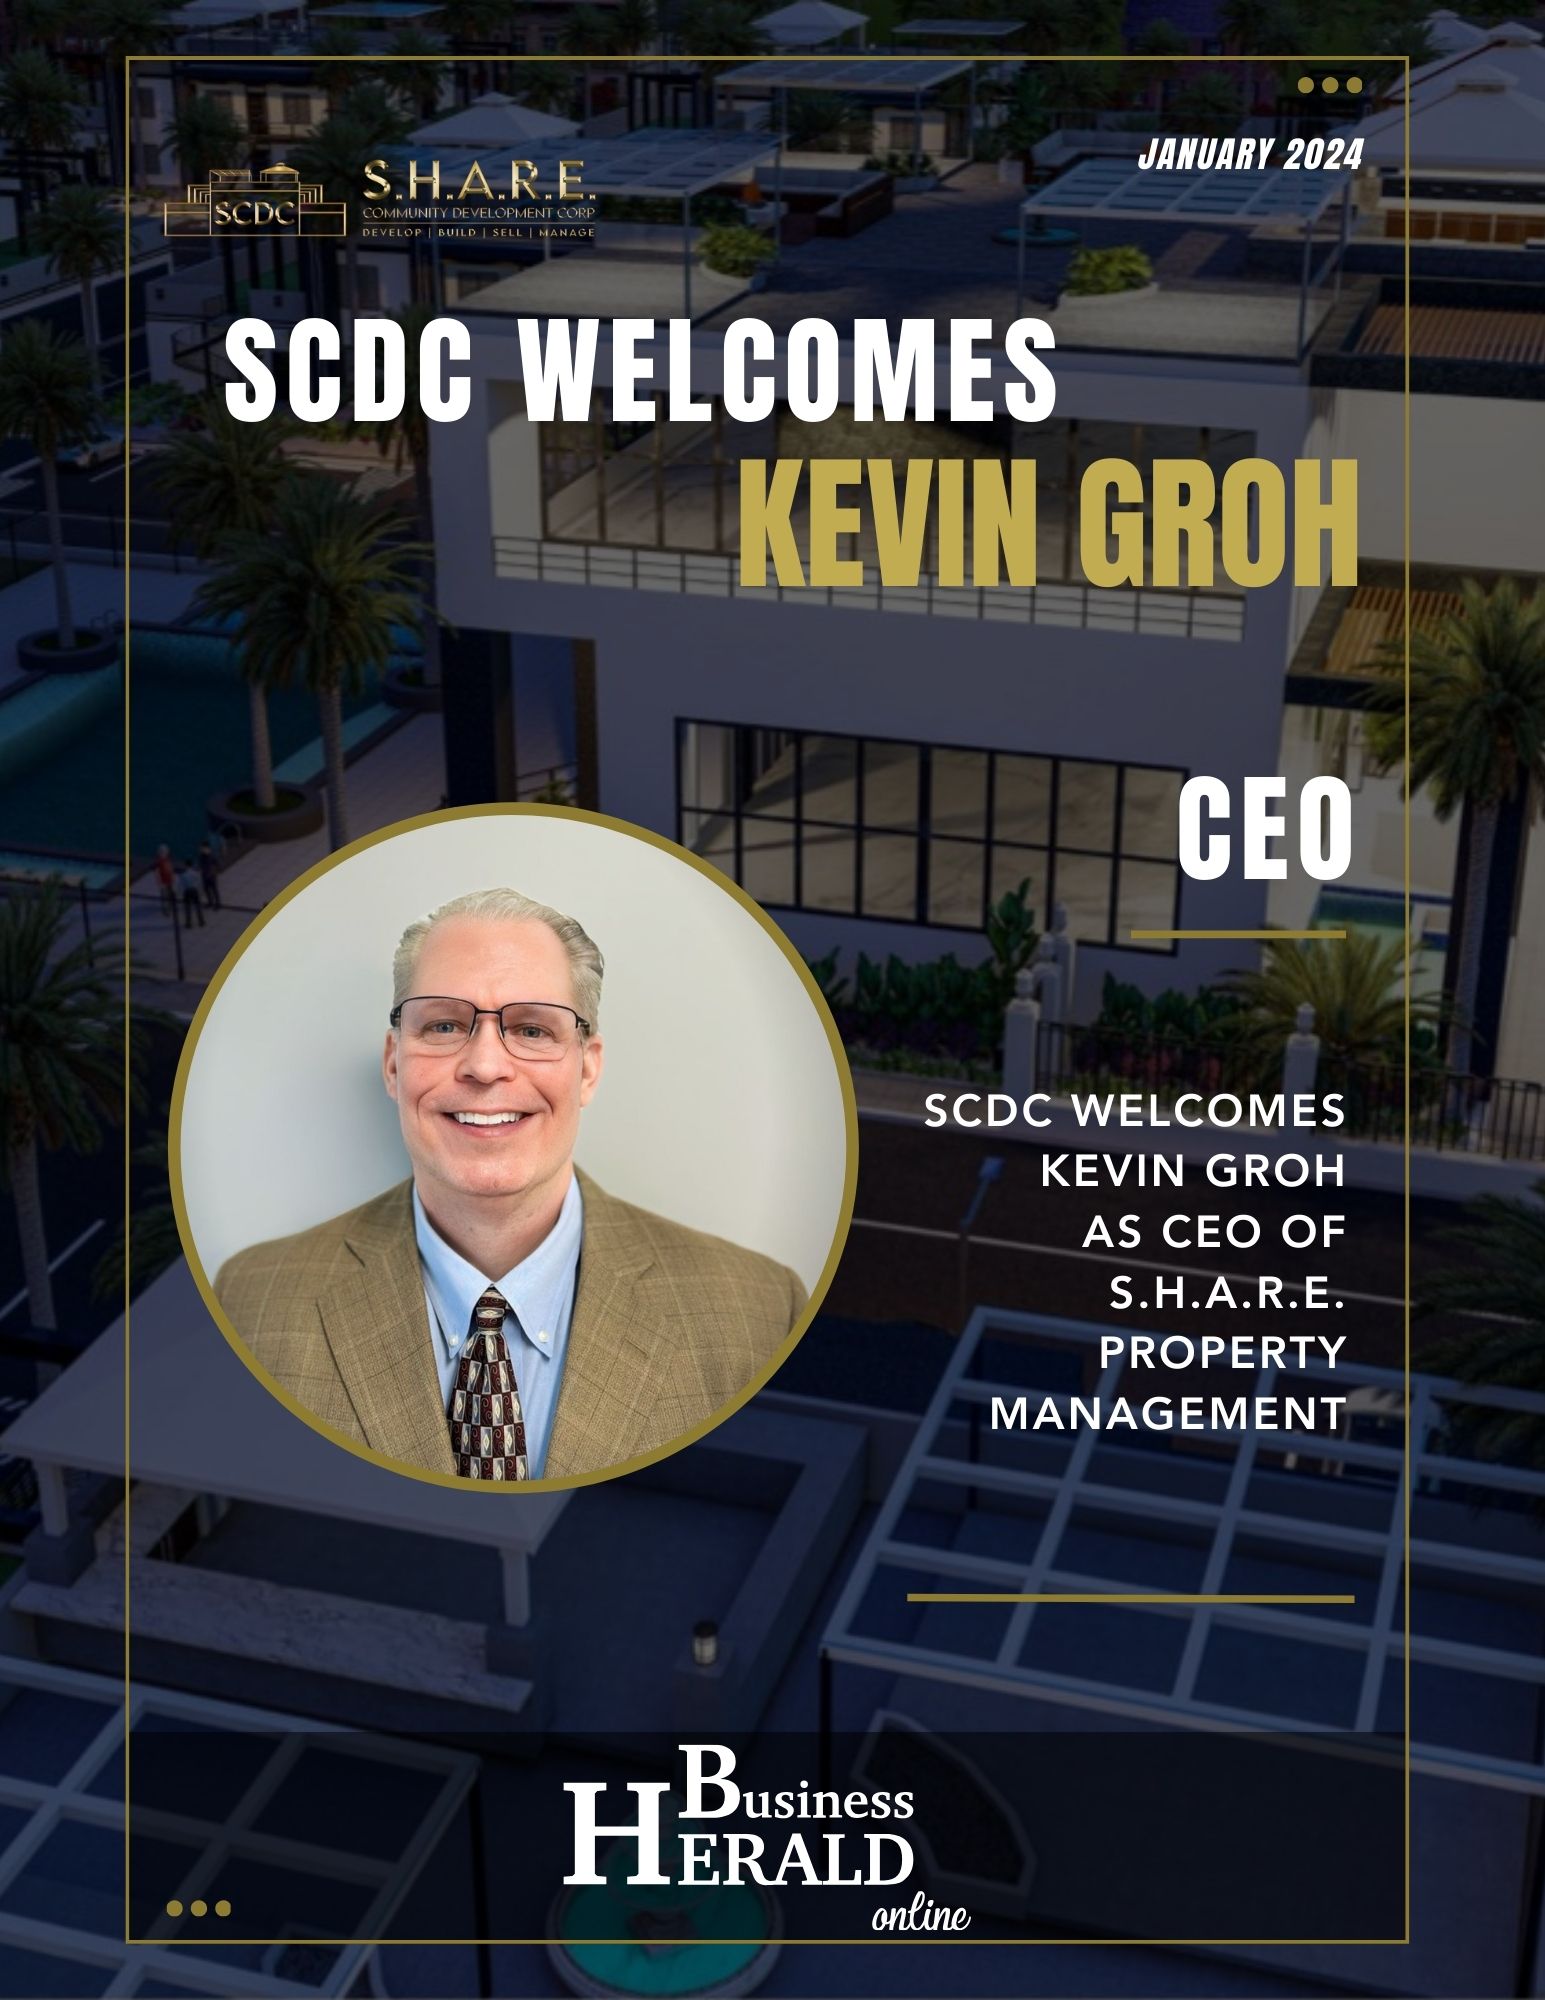 Kevin Groh Appointed CEO of S.H.A.R.E. Property Management, A Visionary in Customer Service